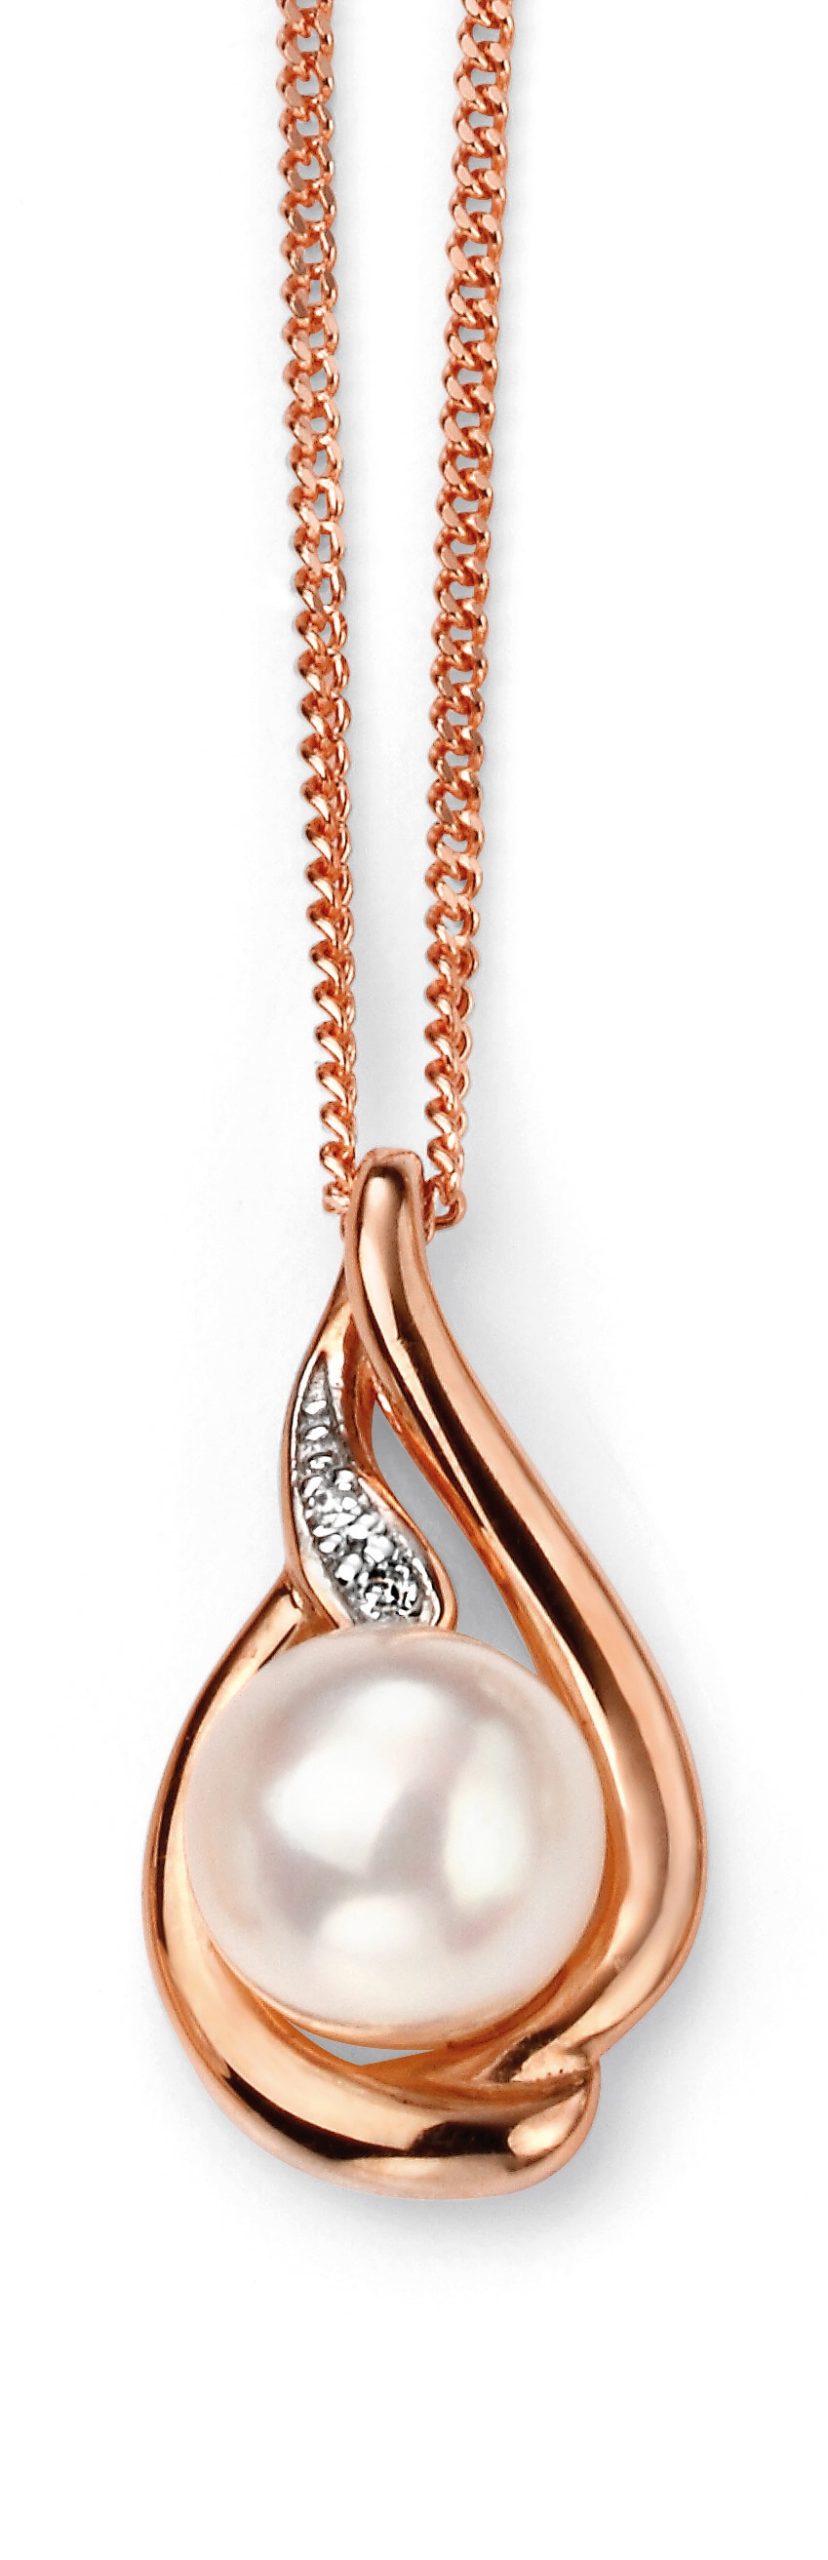 9ct Rose Gold Freshwater Pearl and Diamond Pendant | Hoppers Jewellers